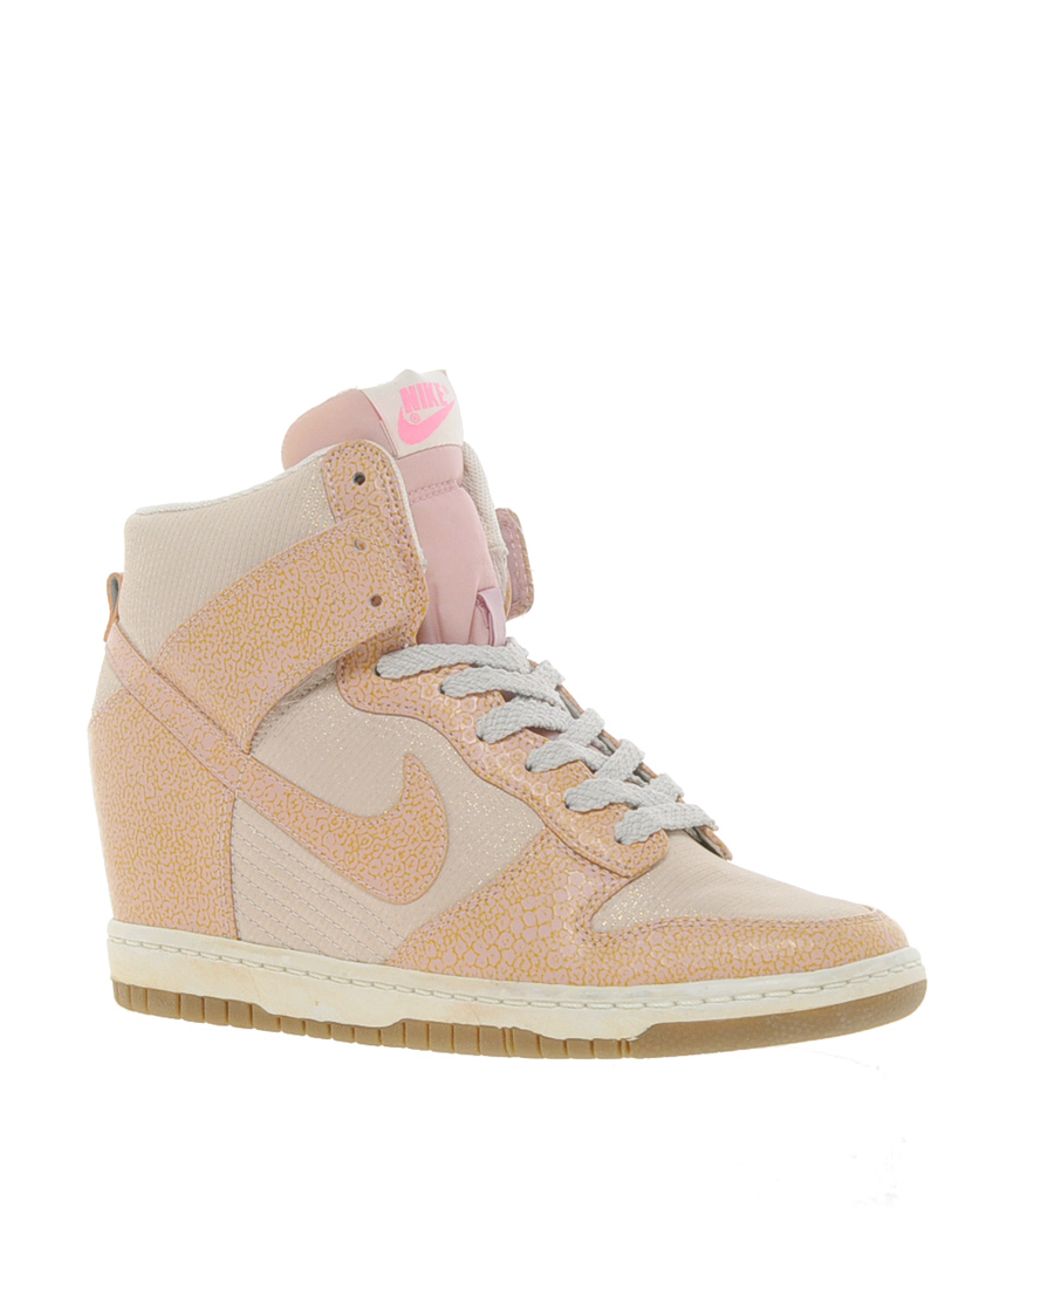 Nike Dunk Sky High Top Pink Wedge Trainers | Lyst